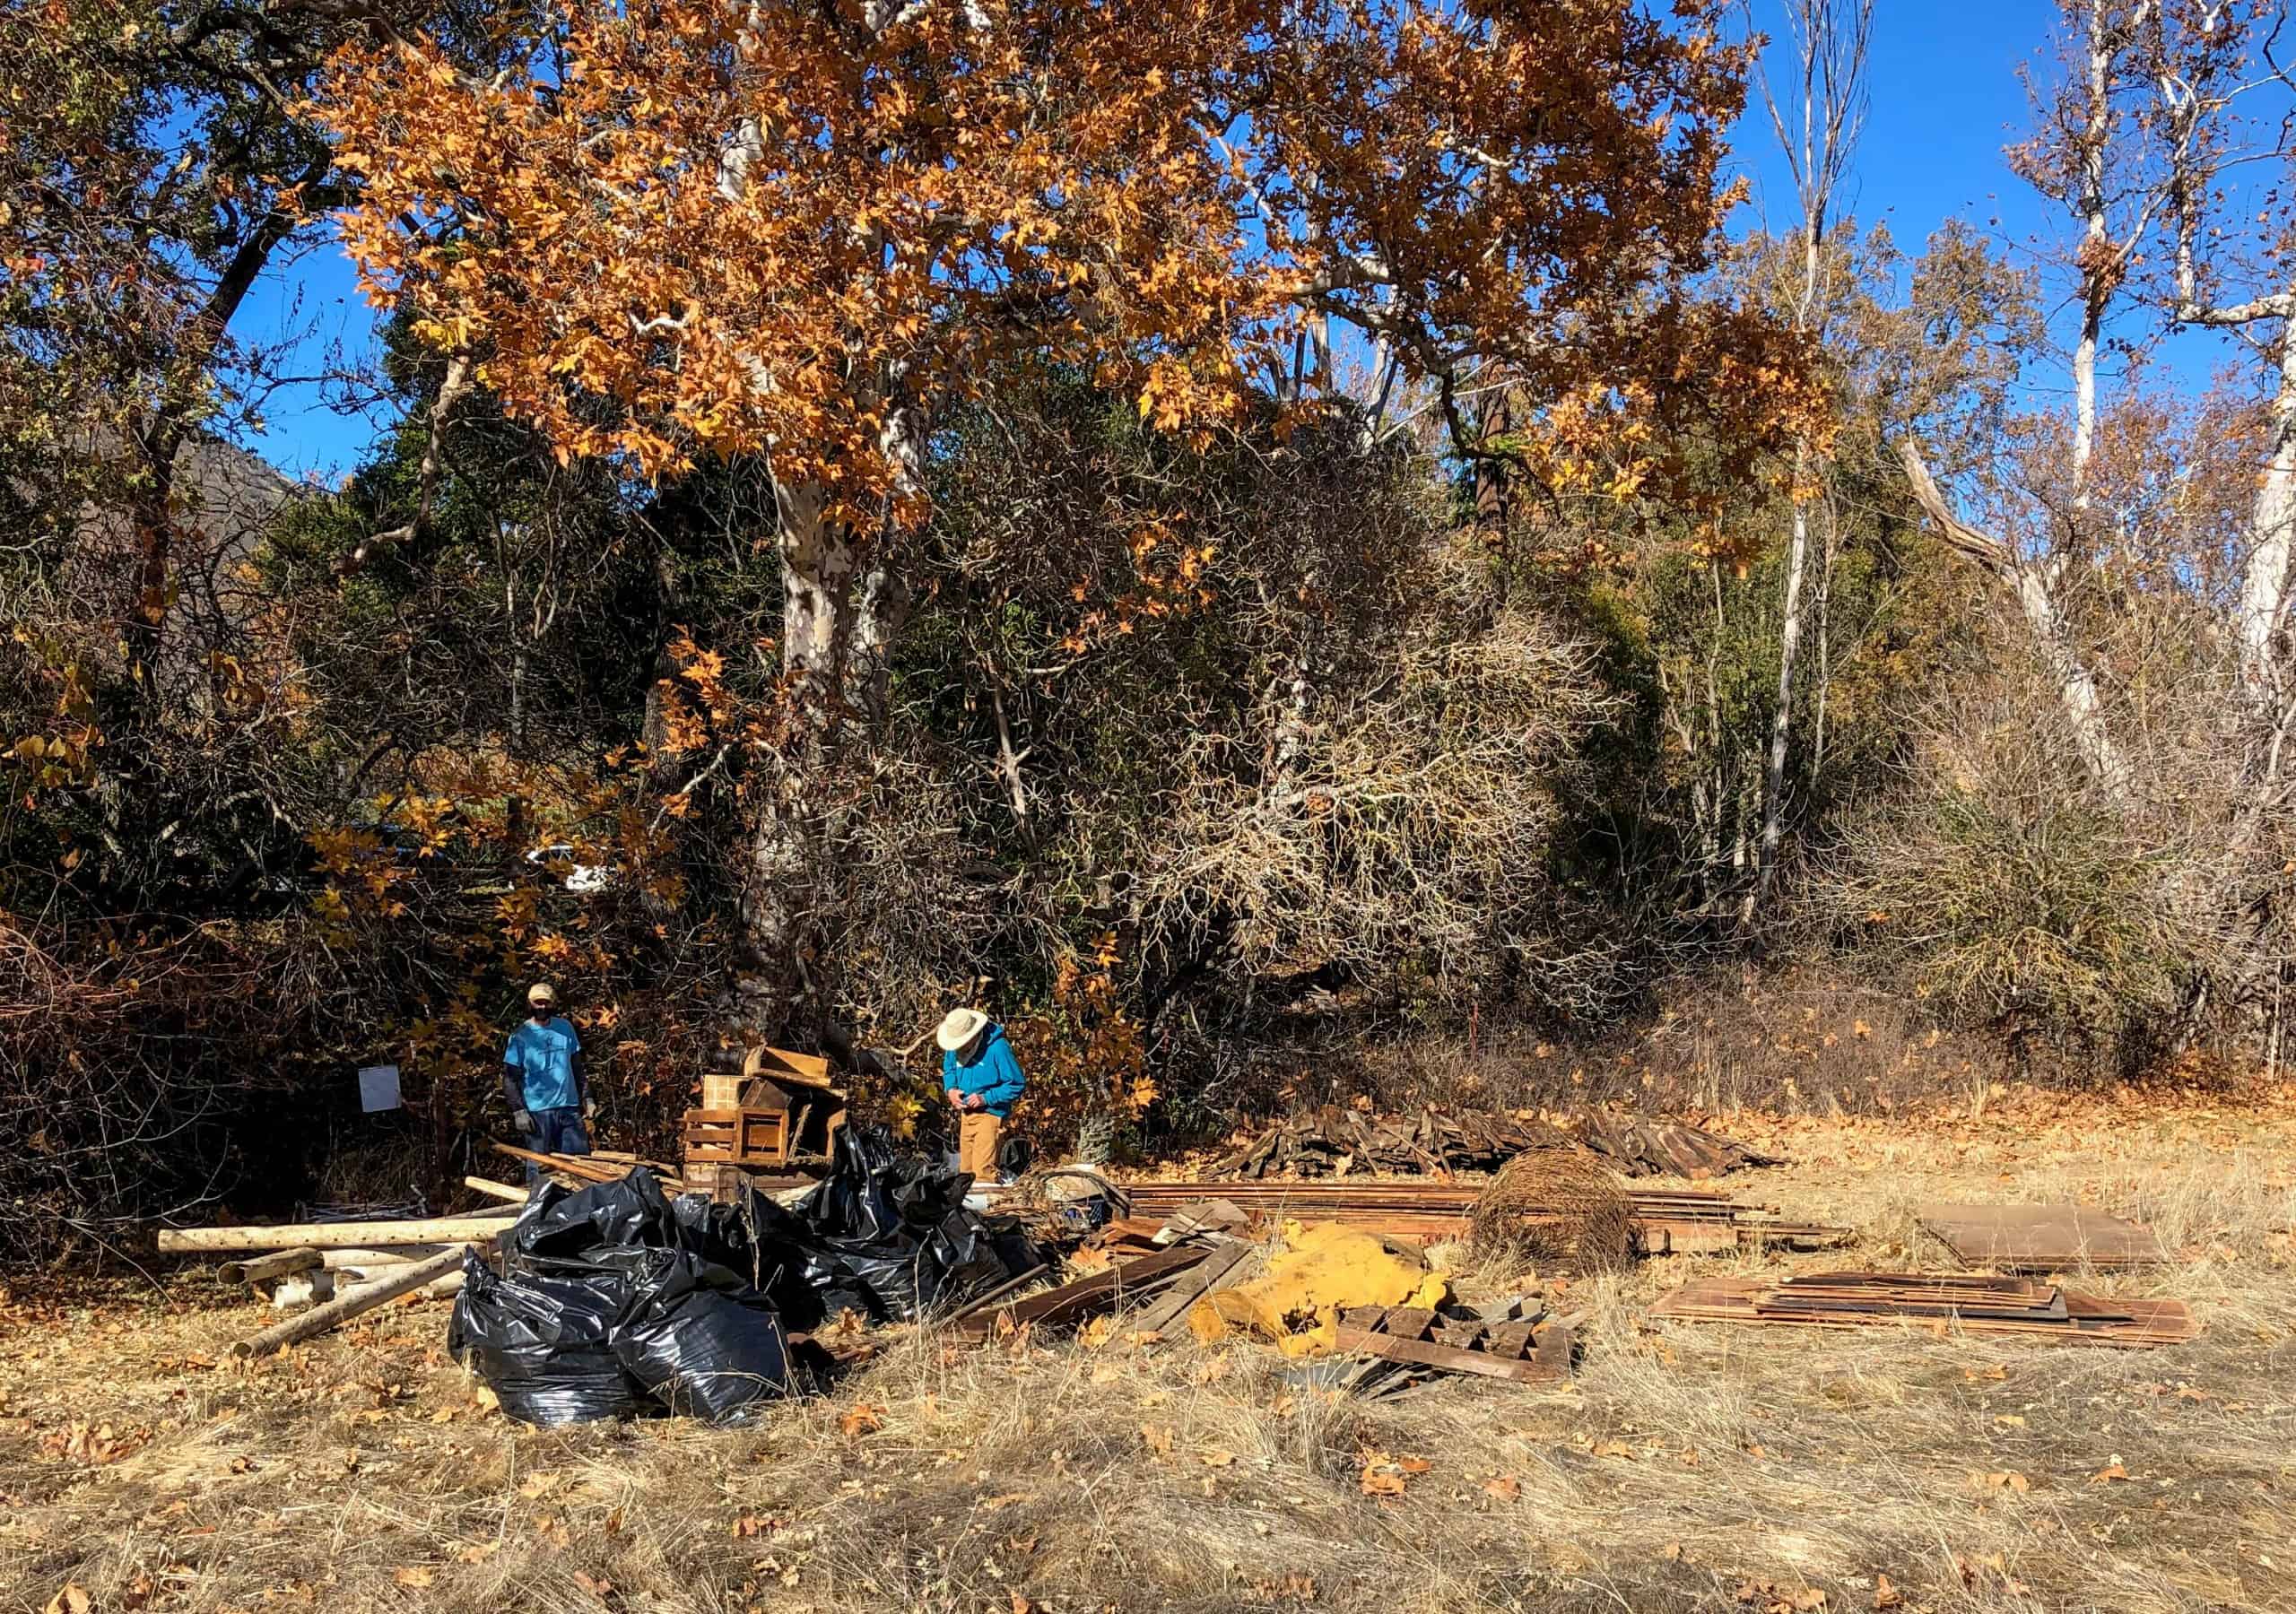 Clearing up debris at anderson ranch